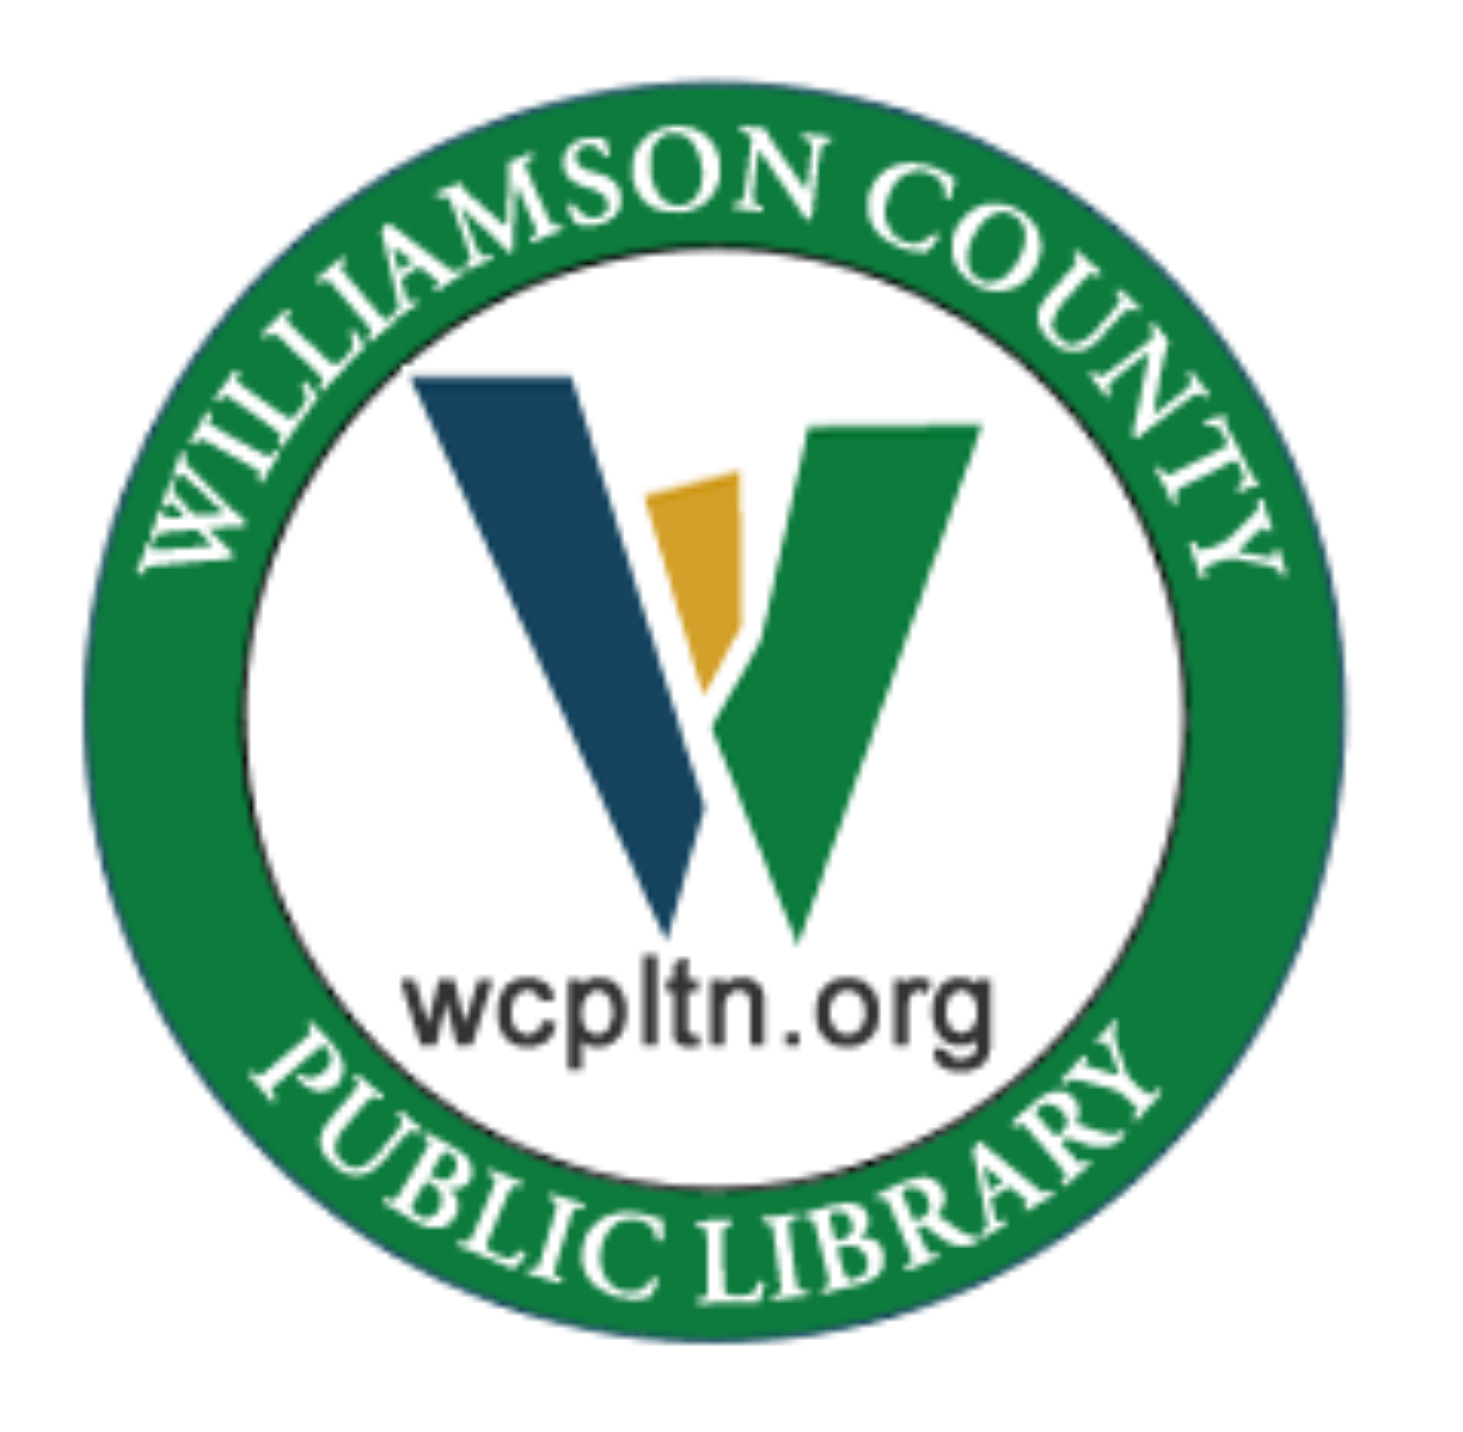 Williamson County Public Library System